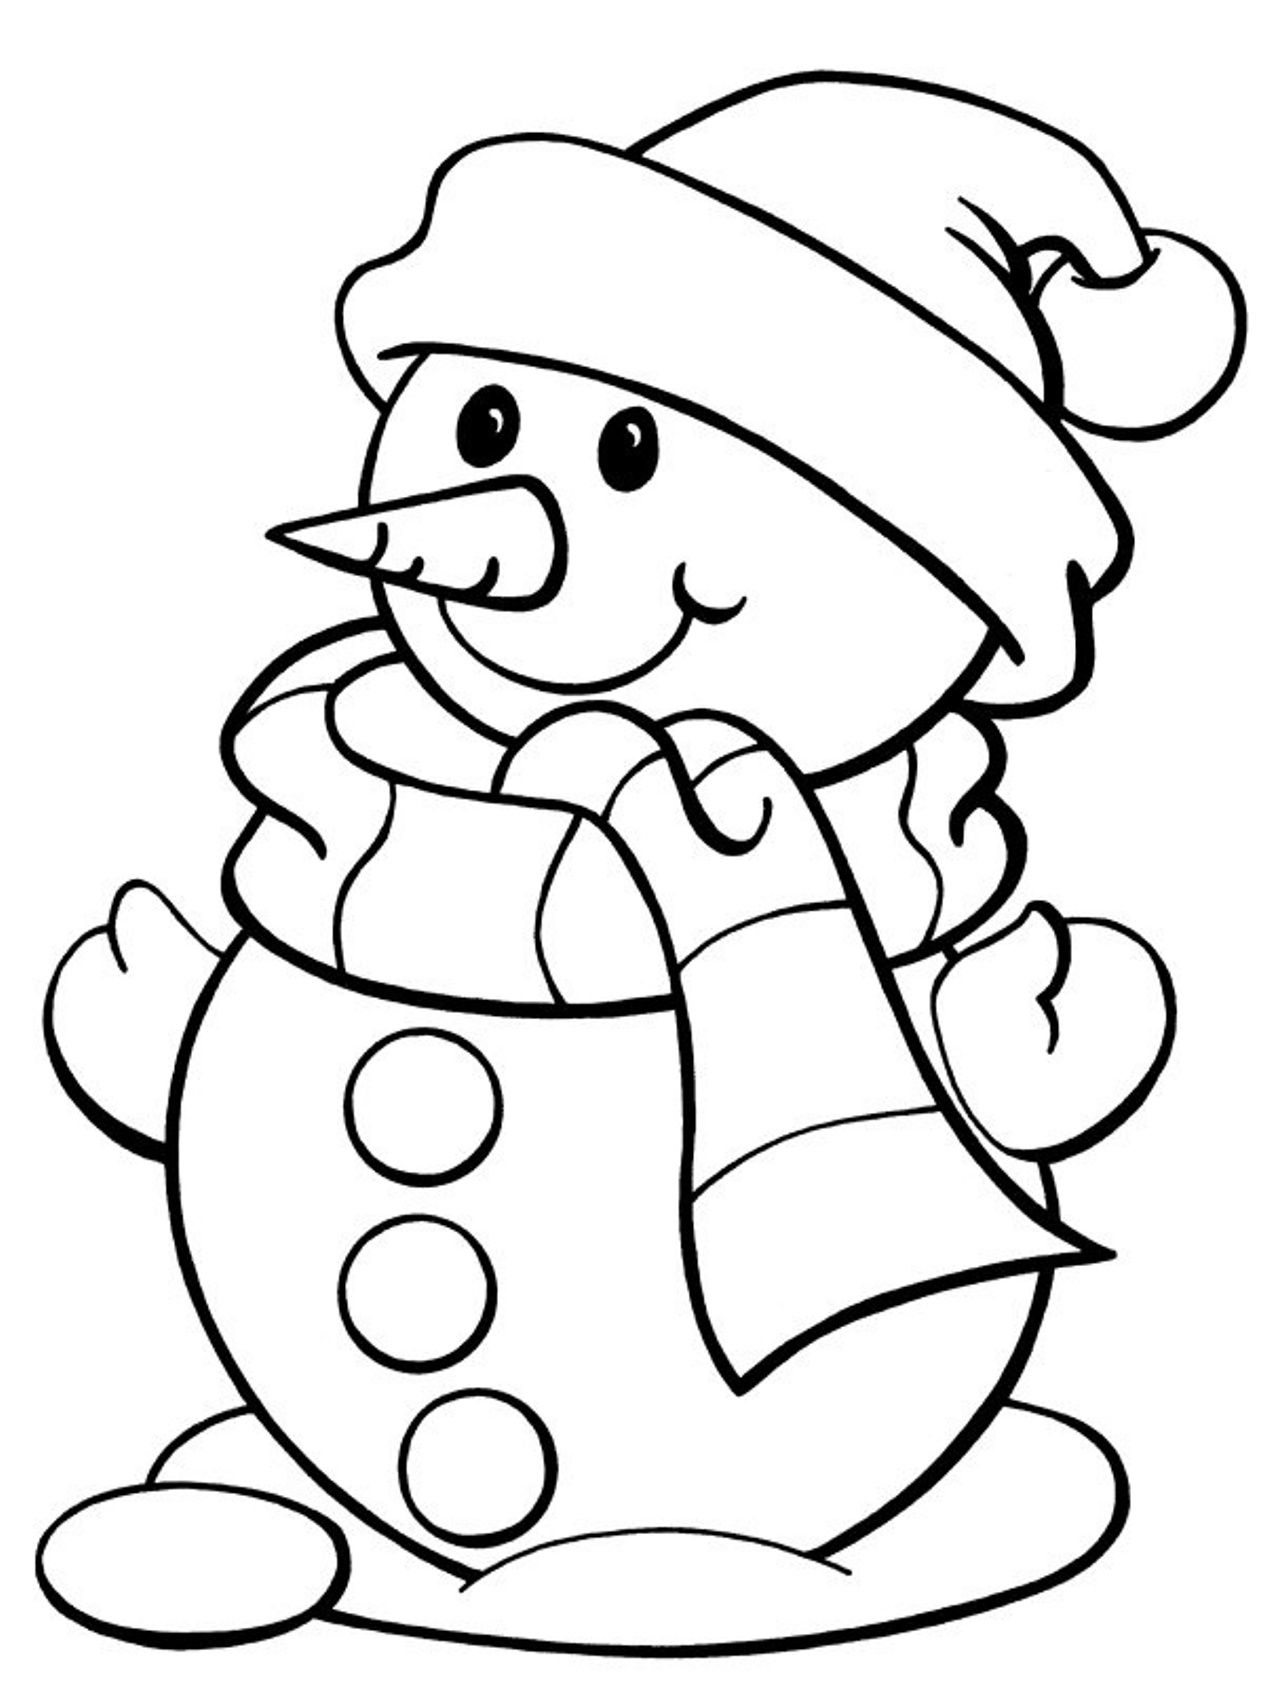 free-printable-winter-coloring-pages-for-kids